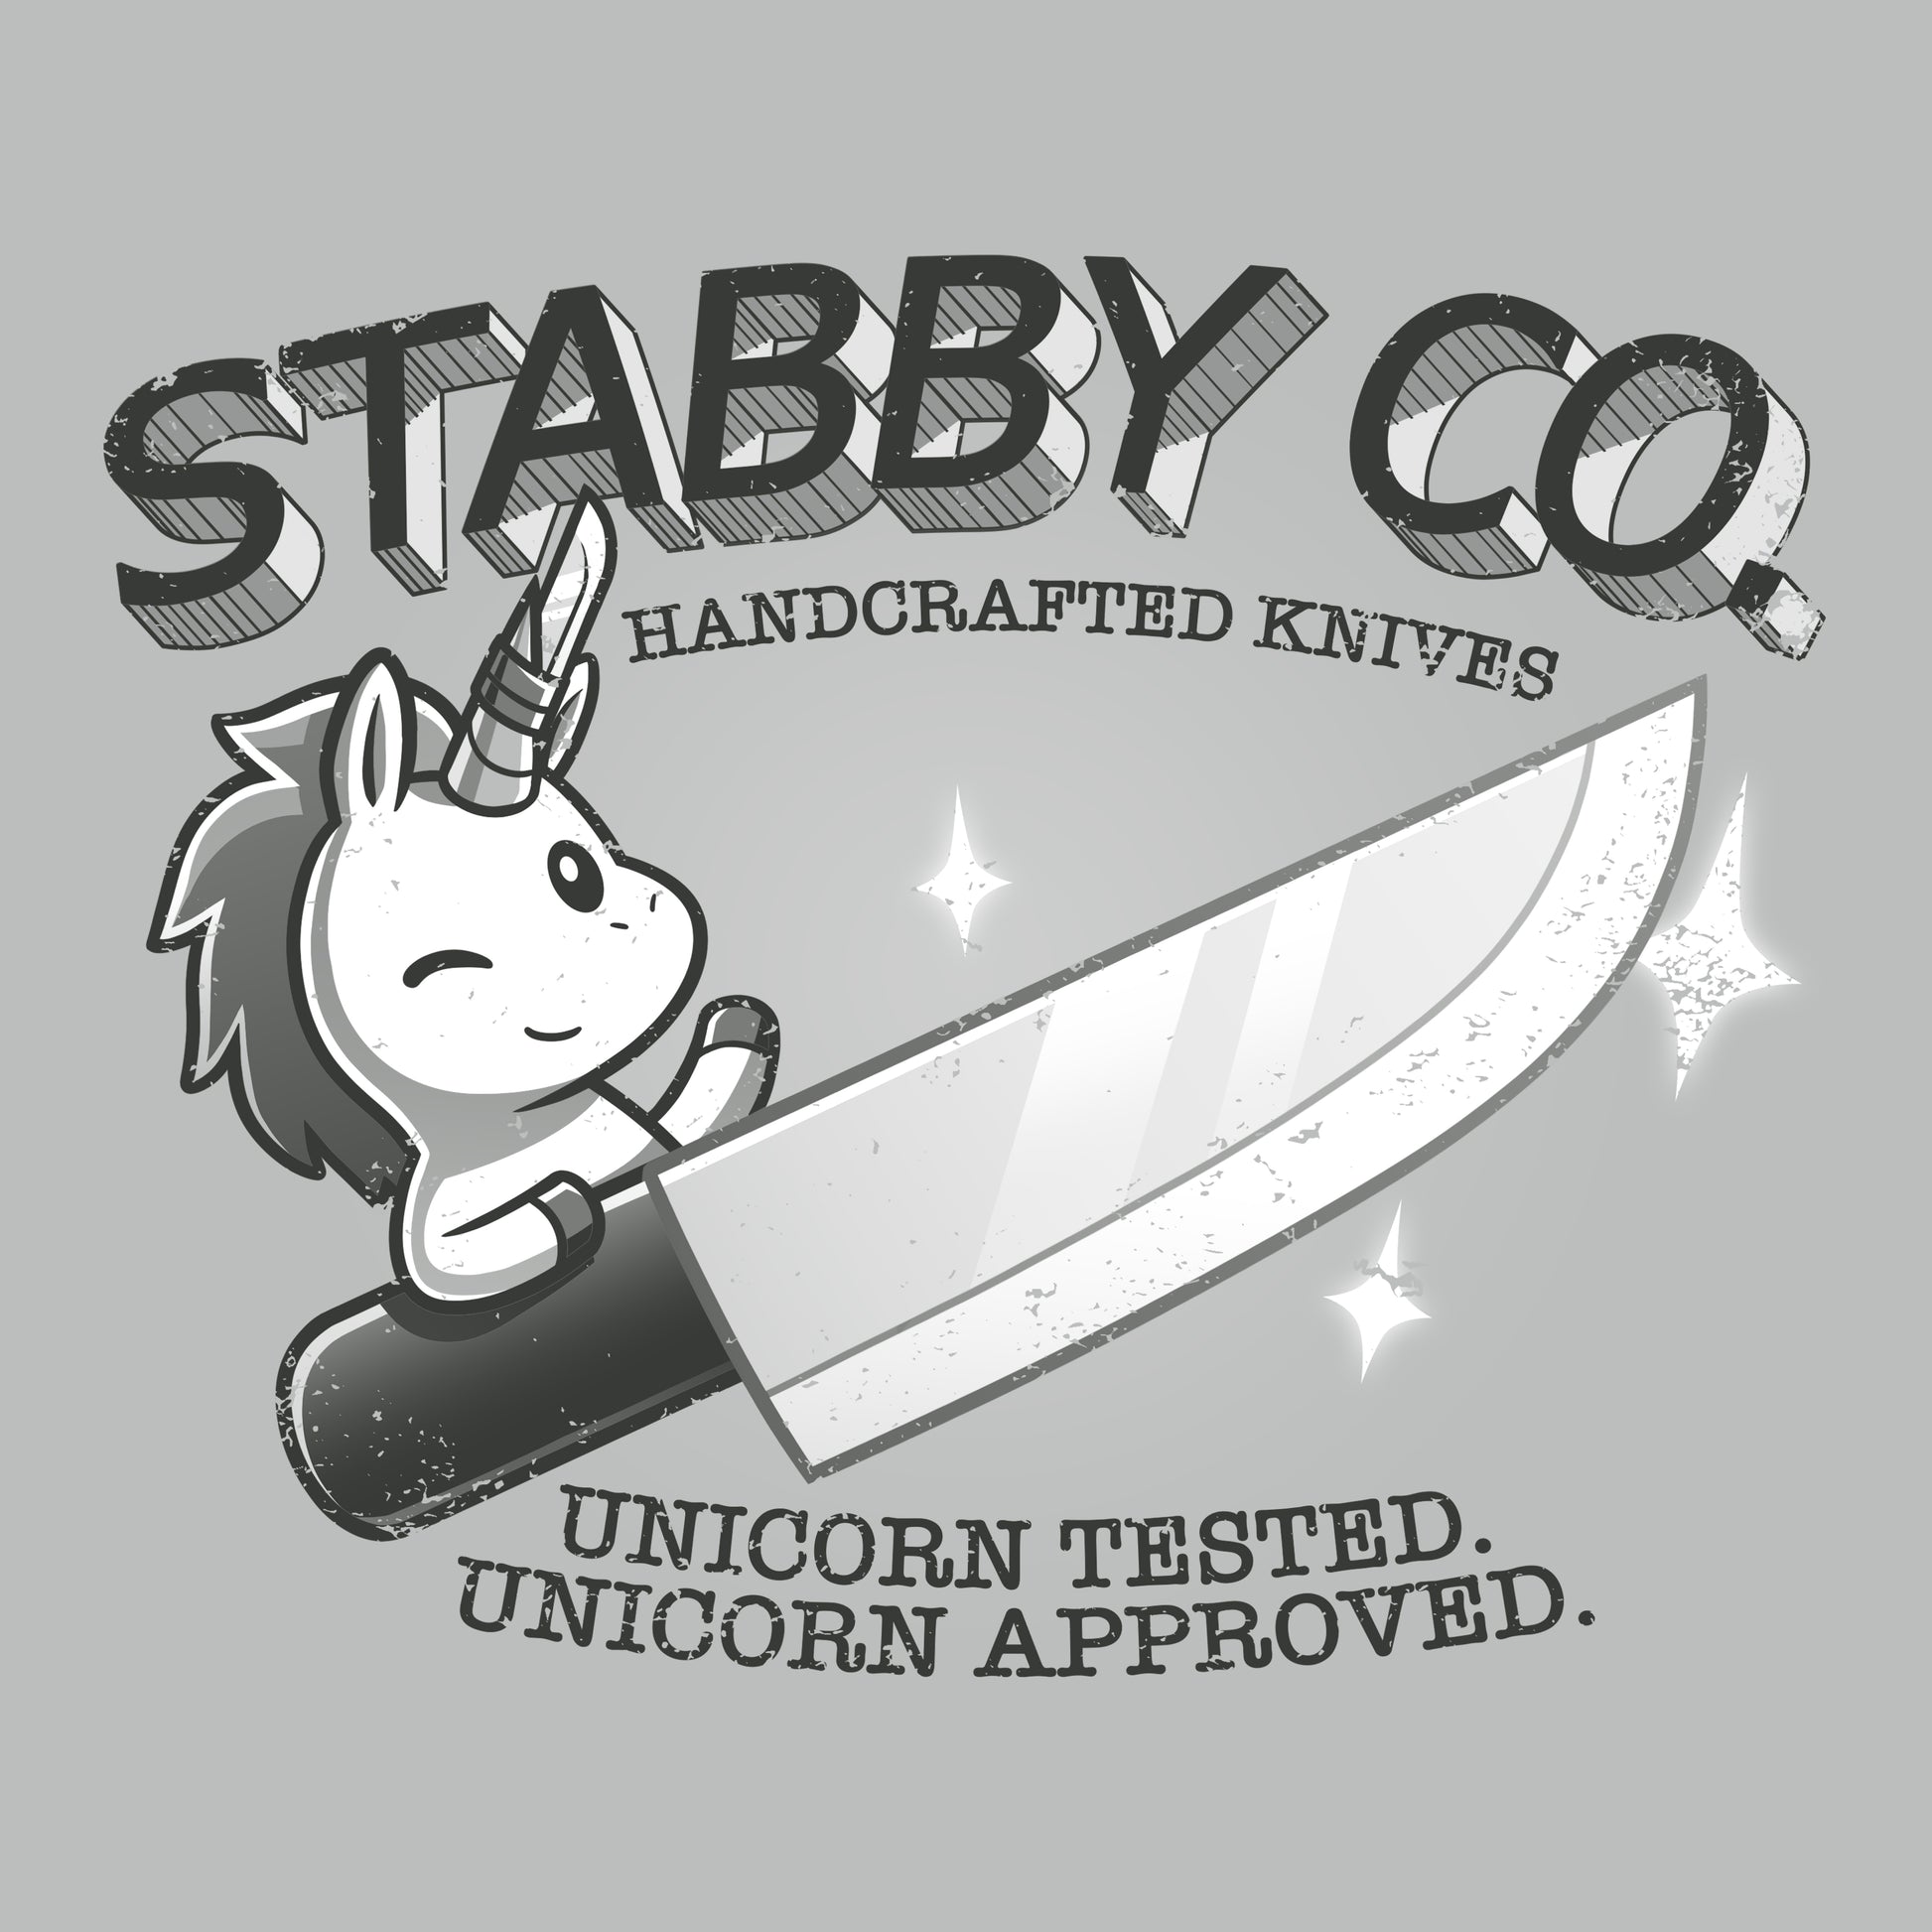 TeeTurtle's Stabby Co. Handcrafted Knives unicorn tested.